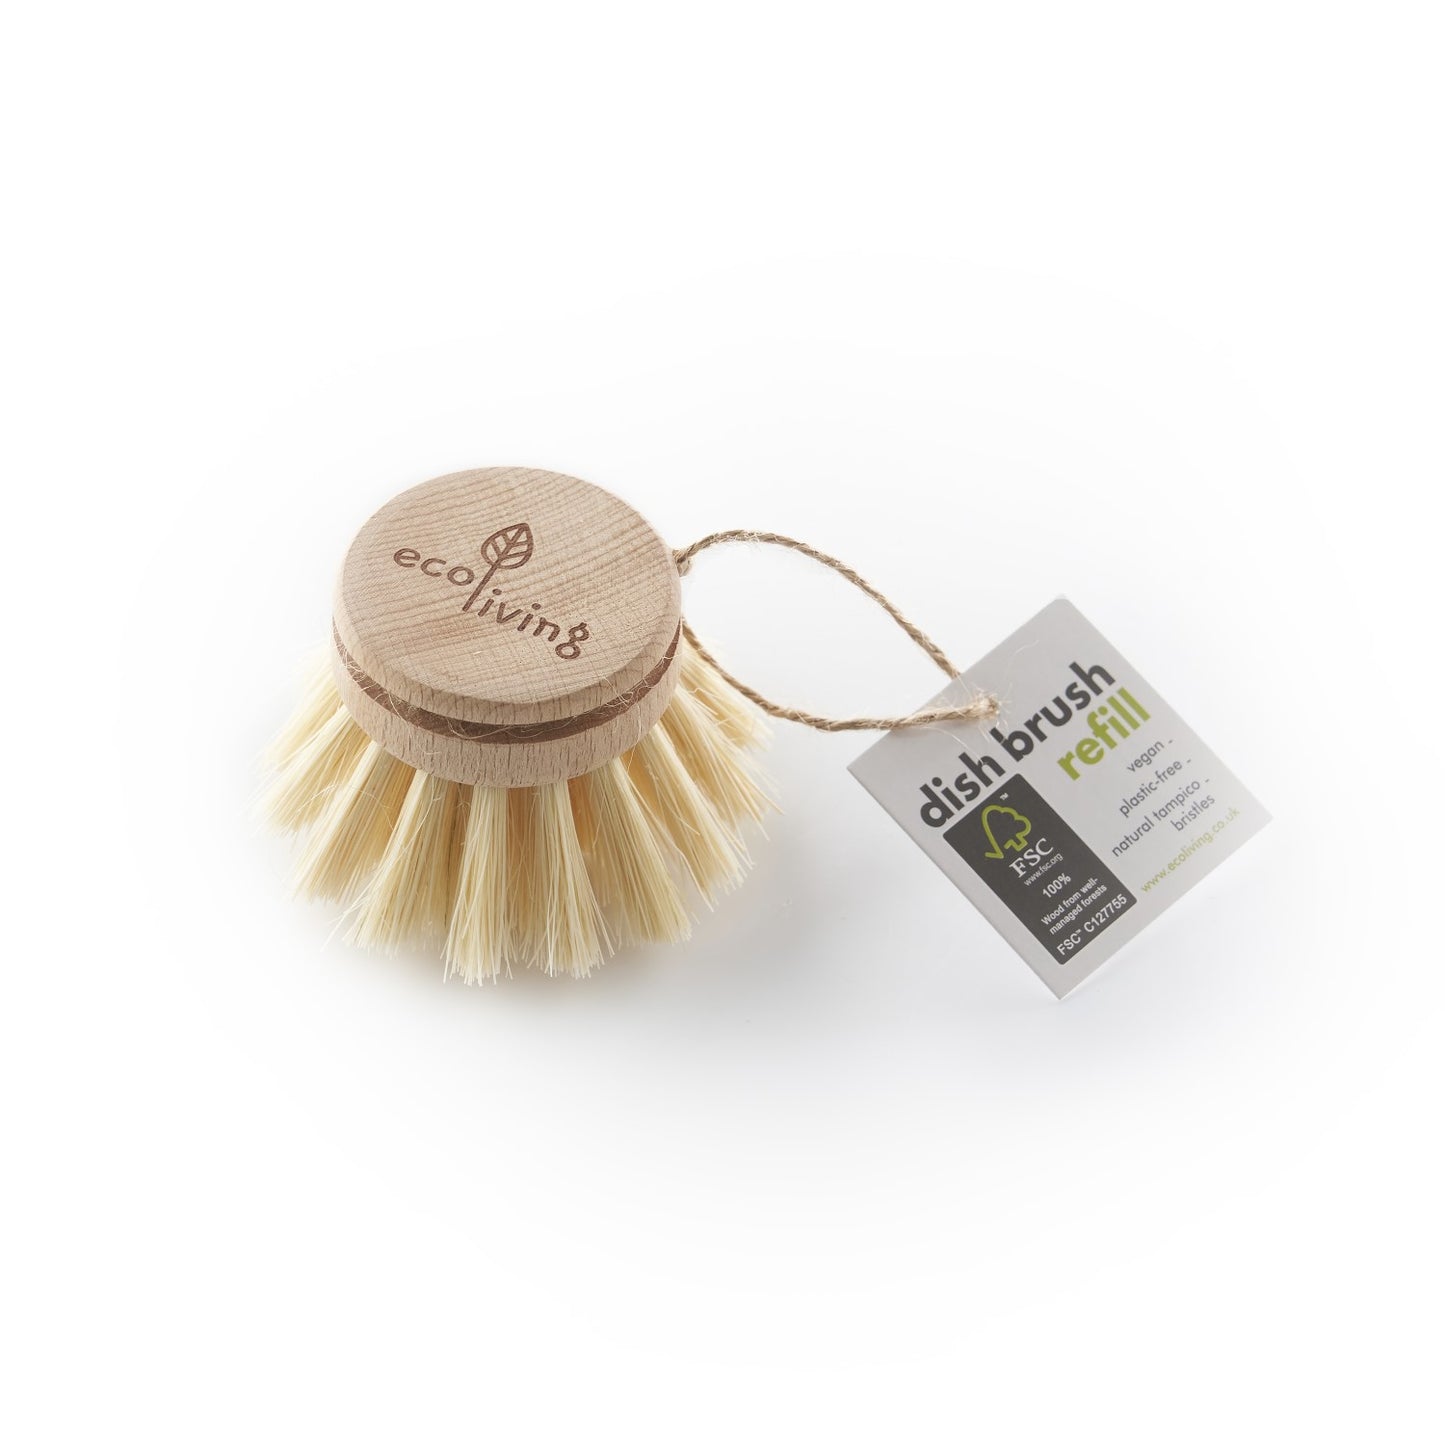 Eco Living | Wooden Dish Head Replacement Head | A plastic-free replacement dish brush head, with plant-based bristles | Vegan, 100% FSC